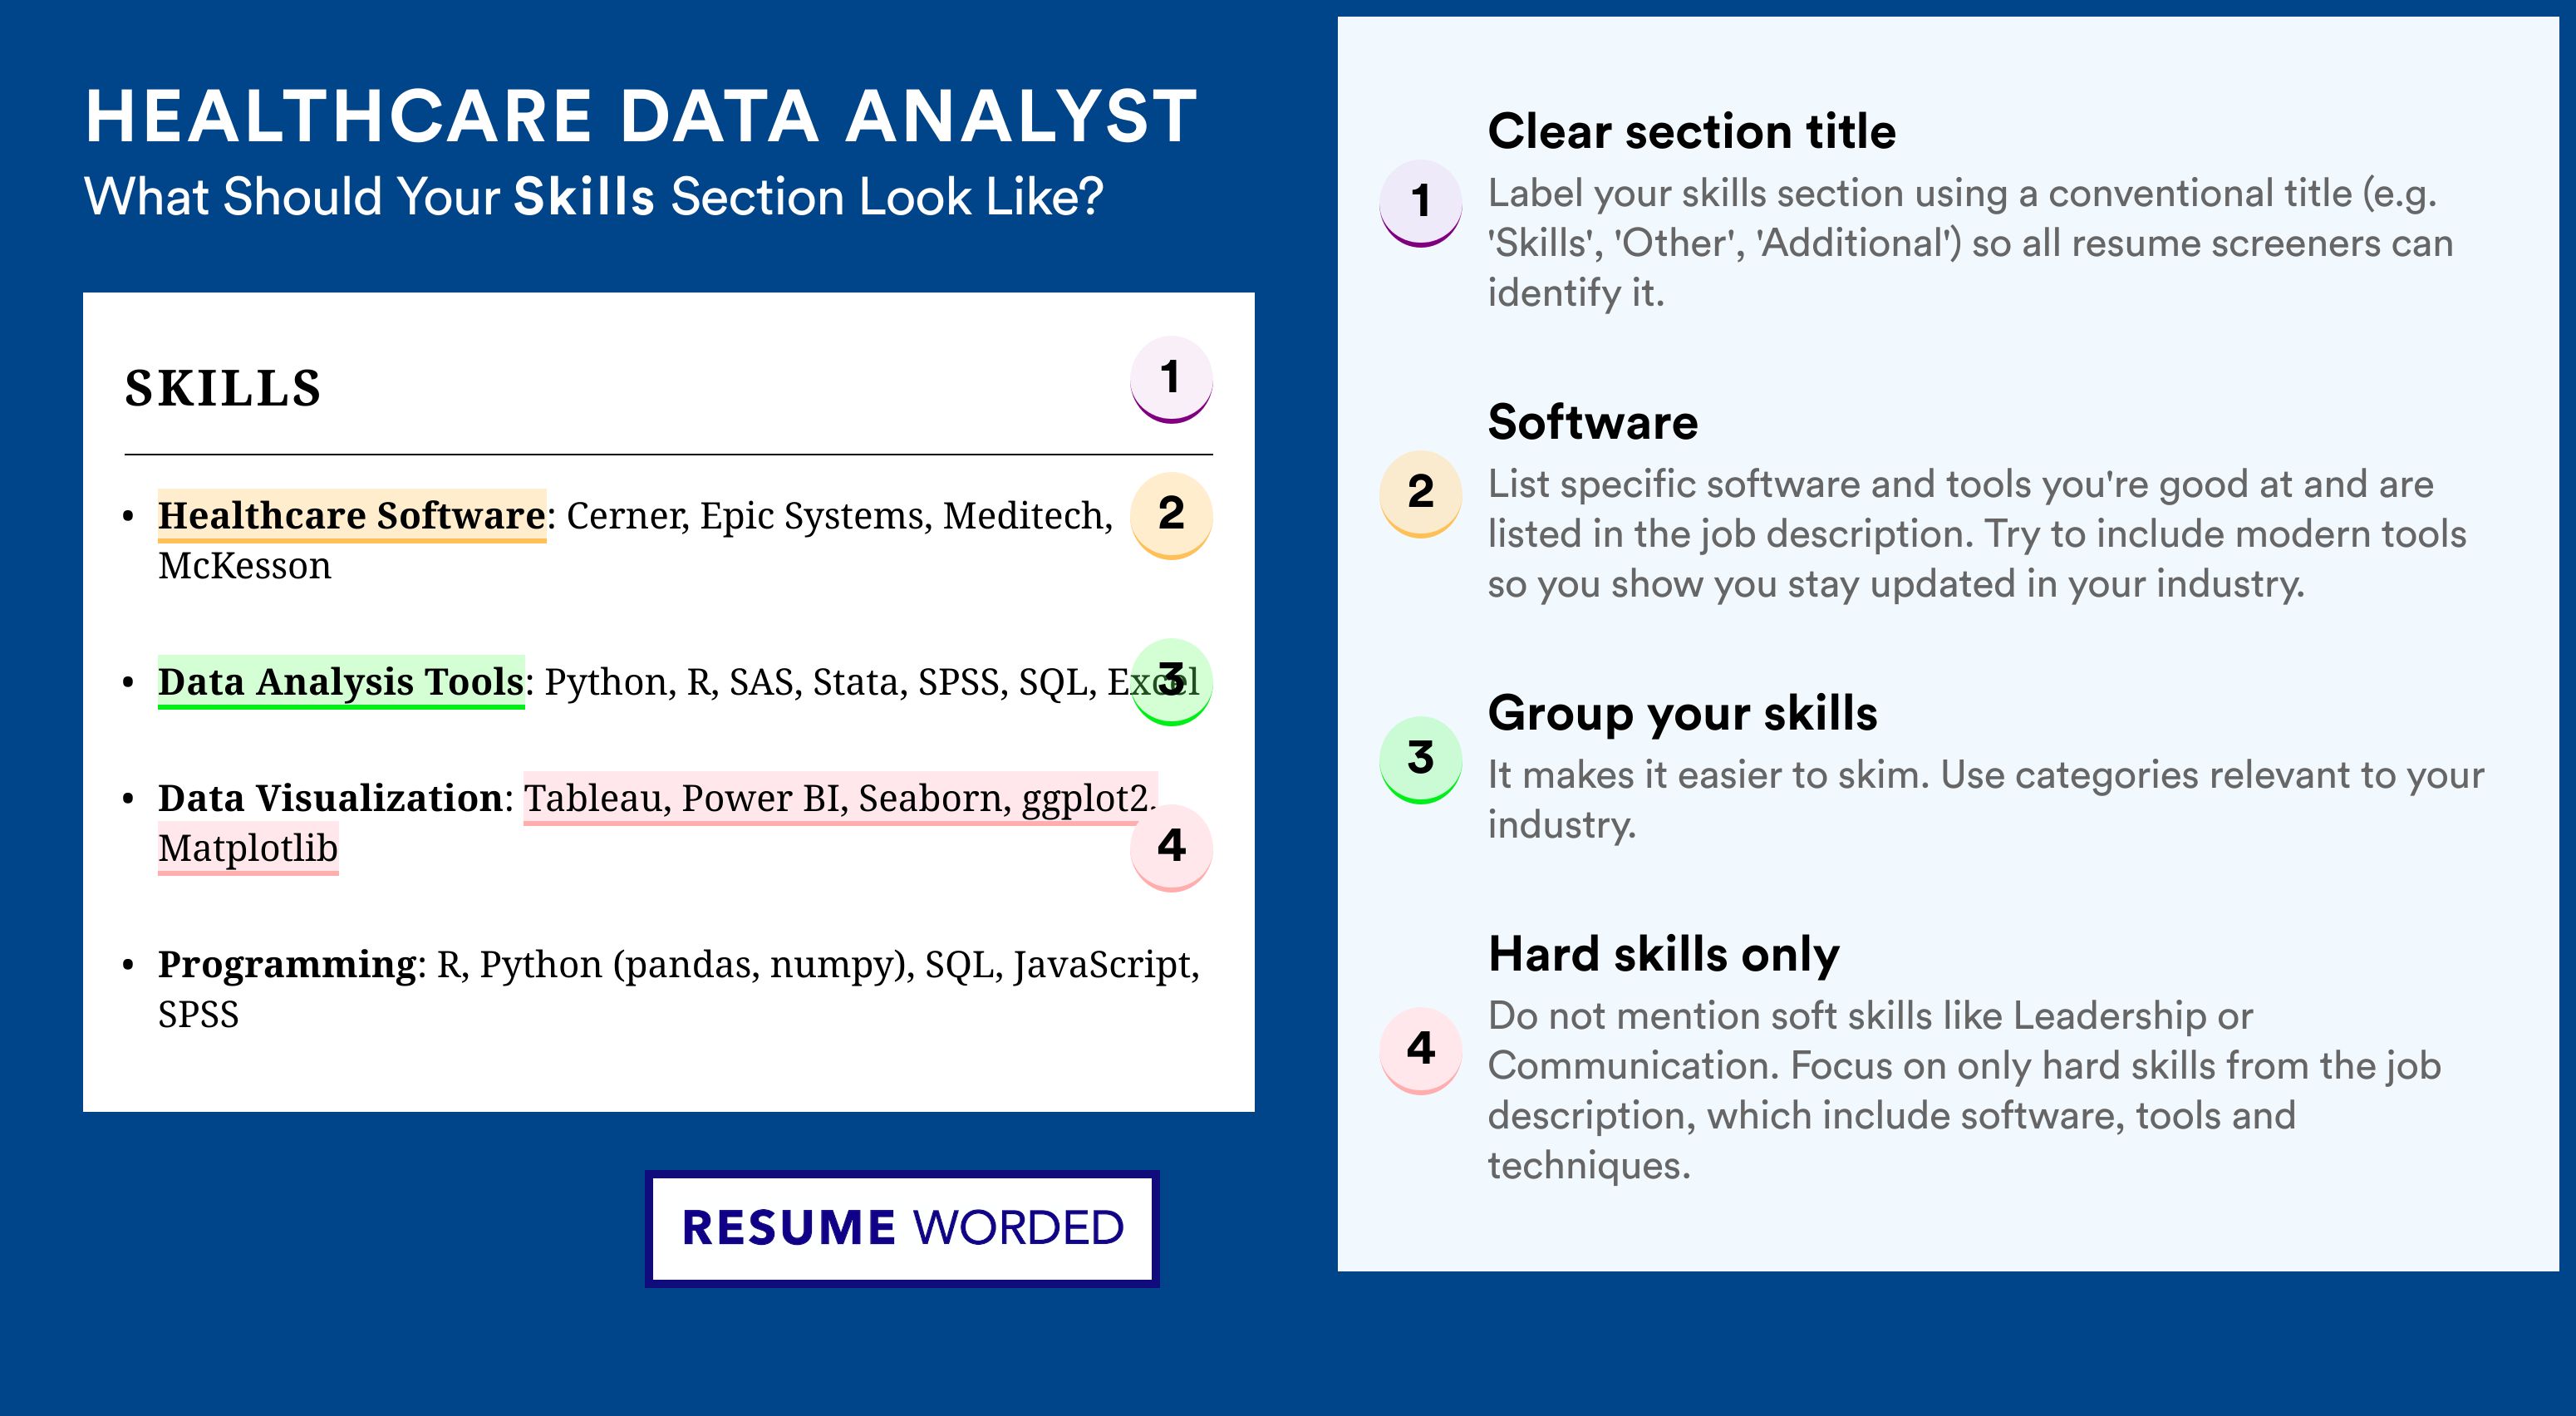 How To Write Your Skills Section - Healthcare Data Analyst Roles